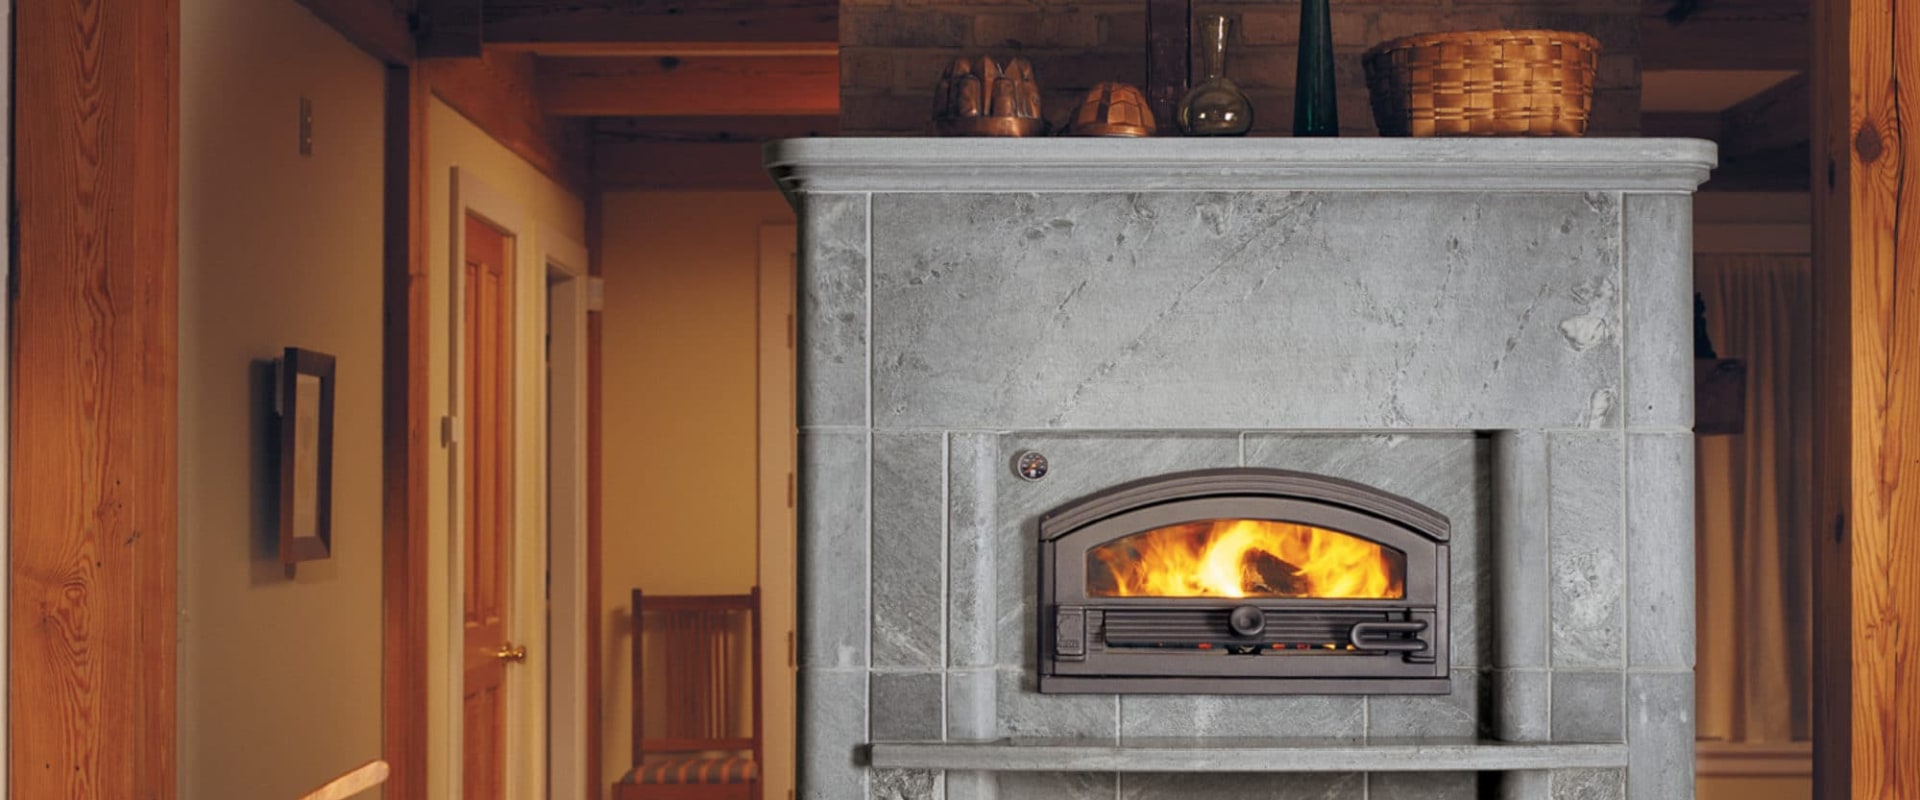 How much is a masonry heater?